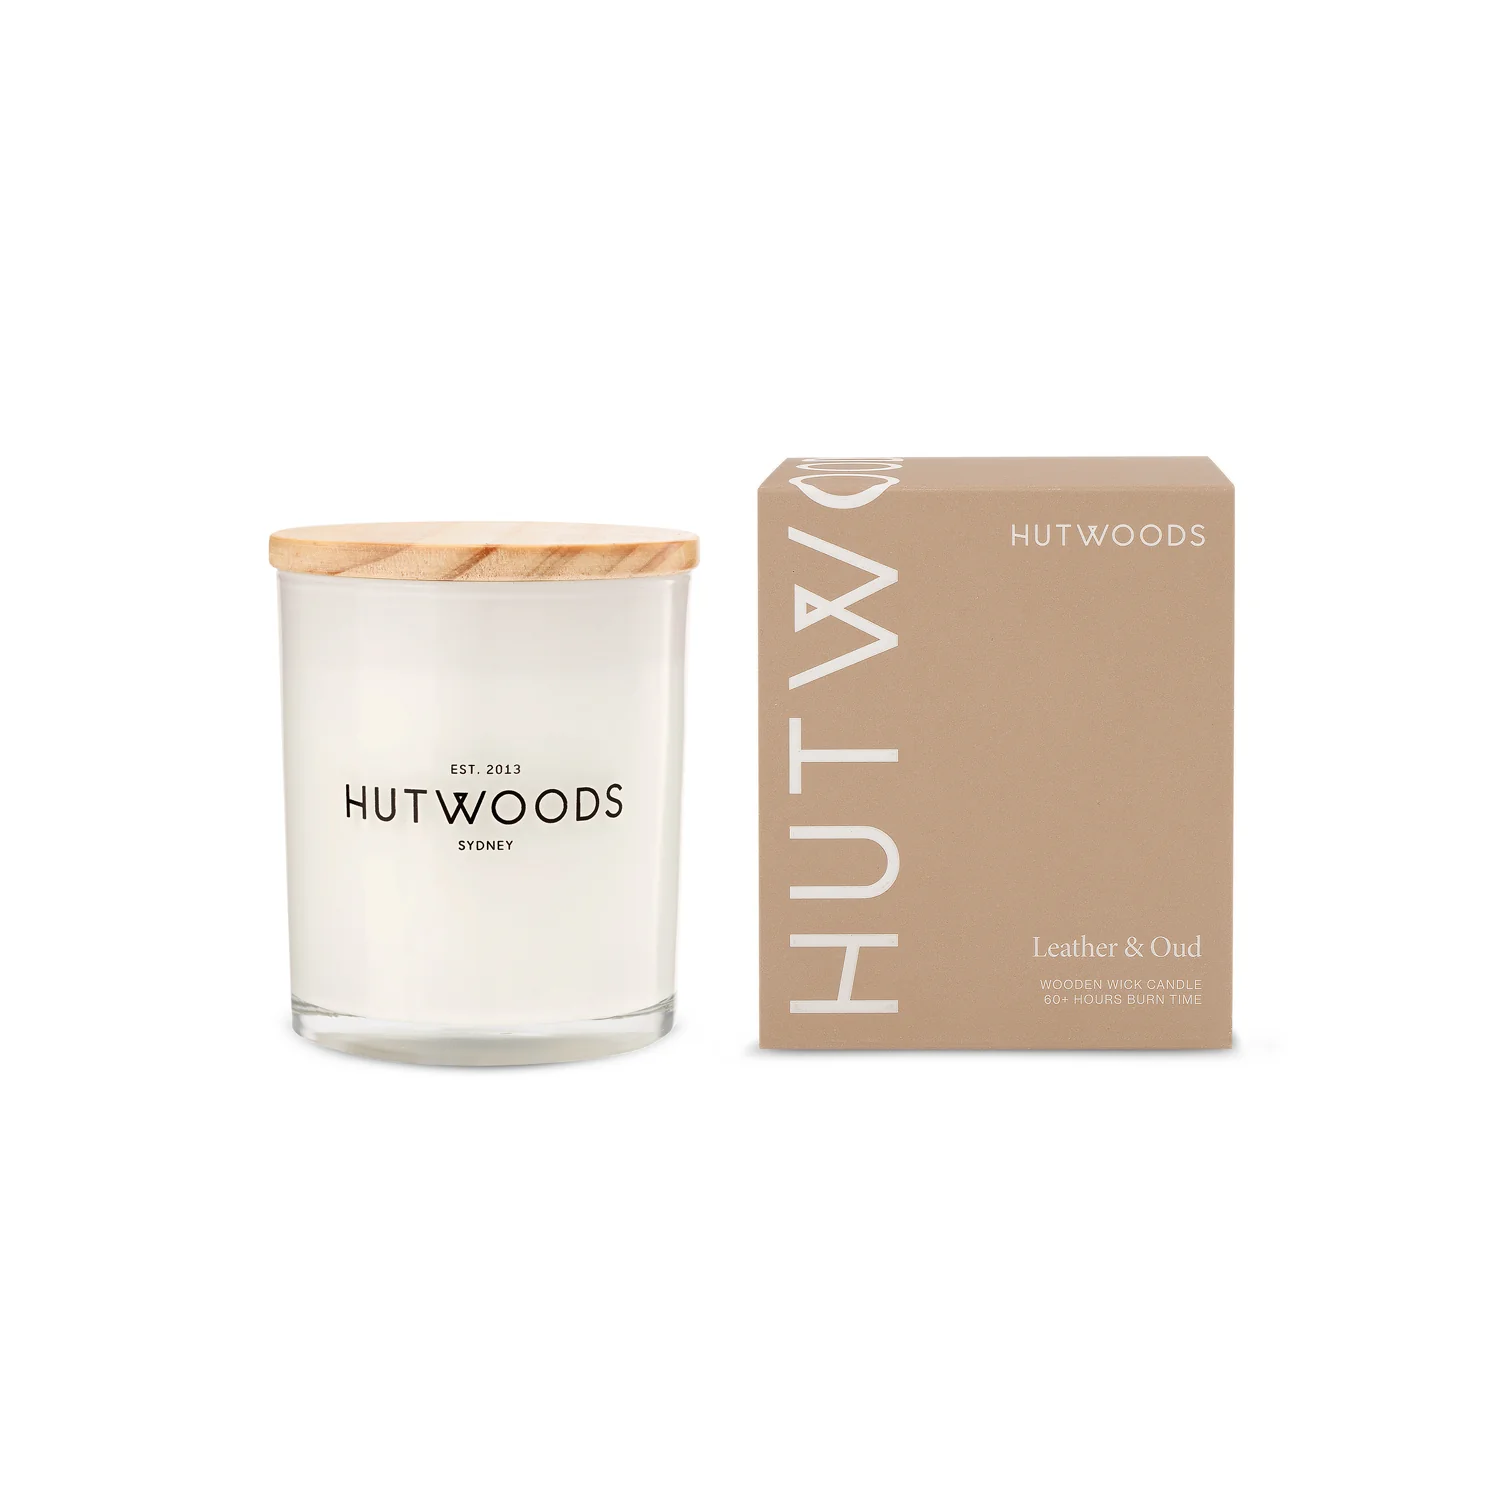 Hutwoods Medium Candle Leather and Oud